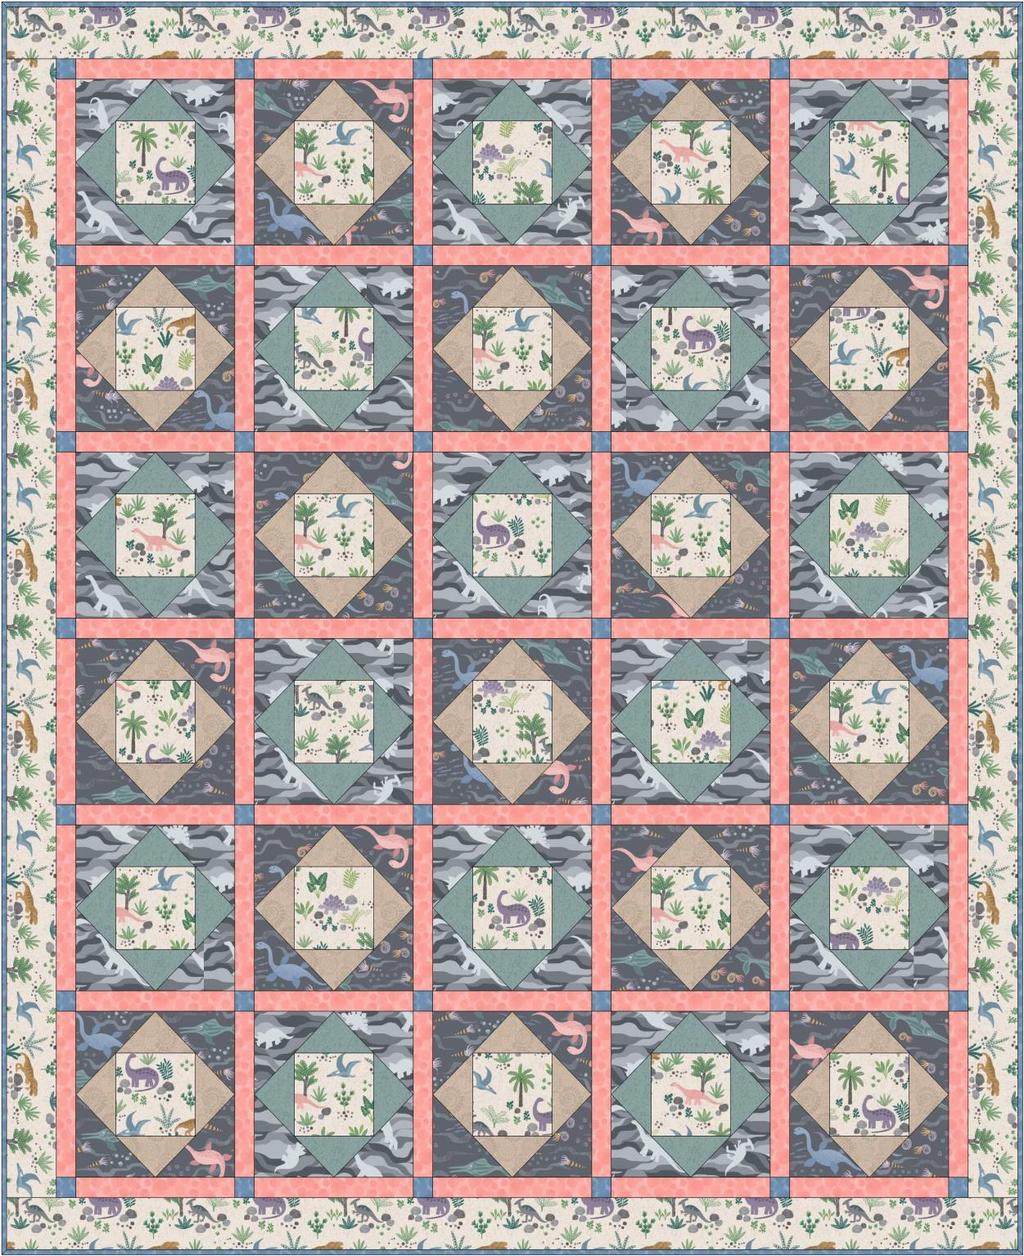 Kimmeridge Bay Quilt Designed and made by Sally Ablett Quilt Size: 51 x 60 Block Size: 8½ x 8½ DESIGN 3 (Main Diagram) FABRIC REQUIREMENTS (Kimmeridge Bay Collection) Fabric 1: ⅝yd - 70cm - A301.